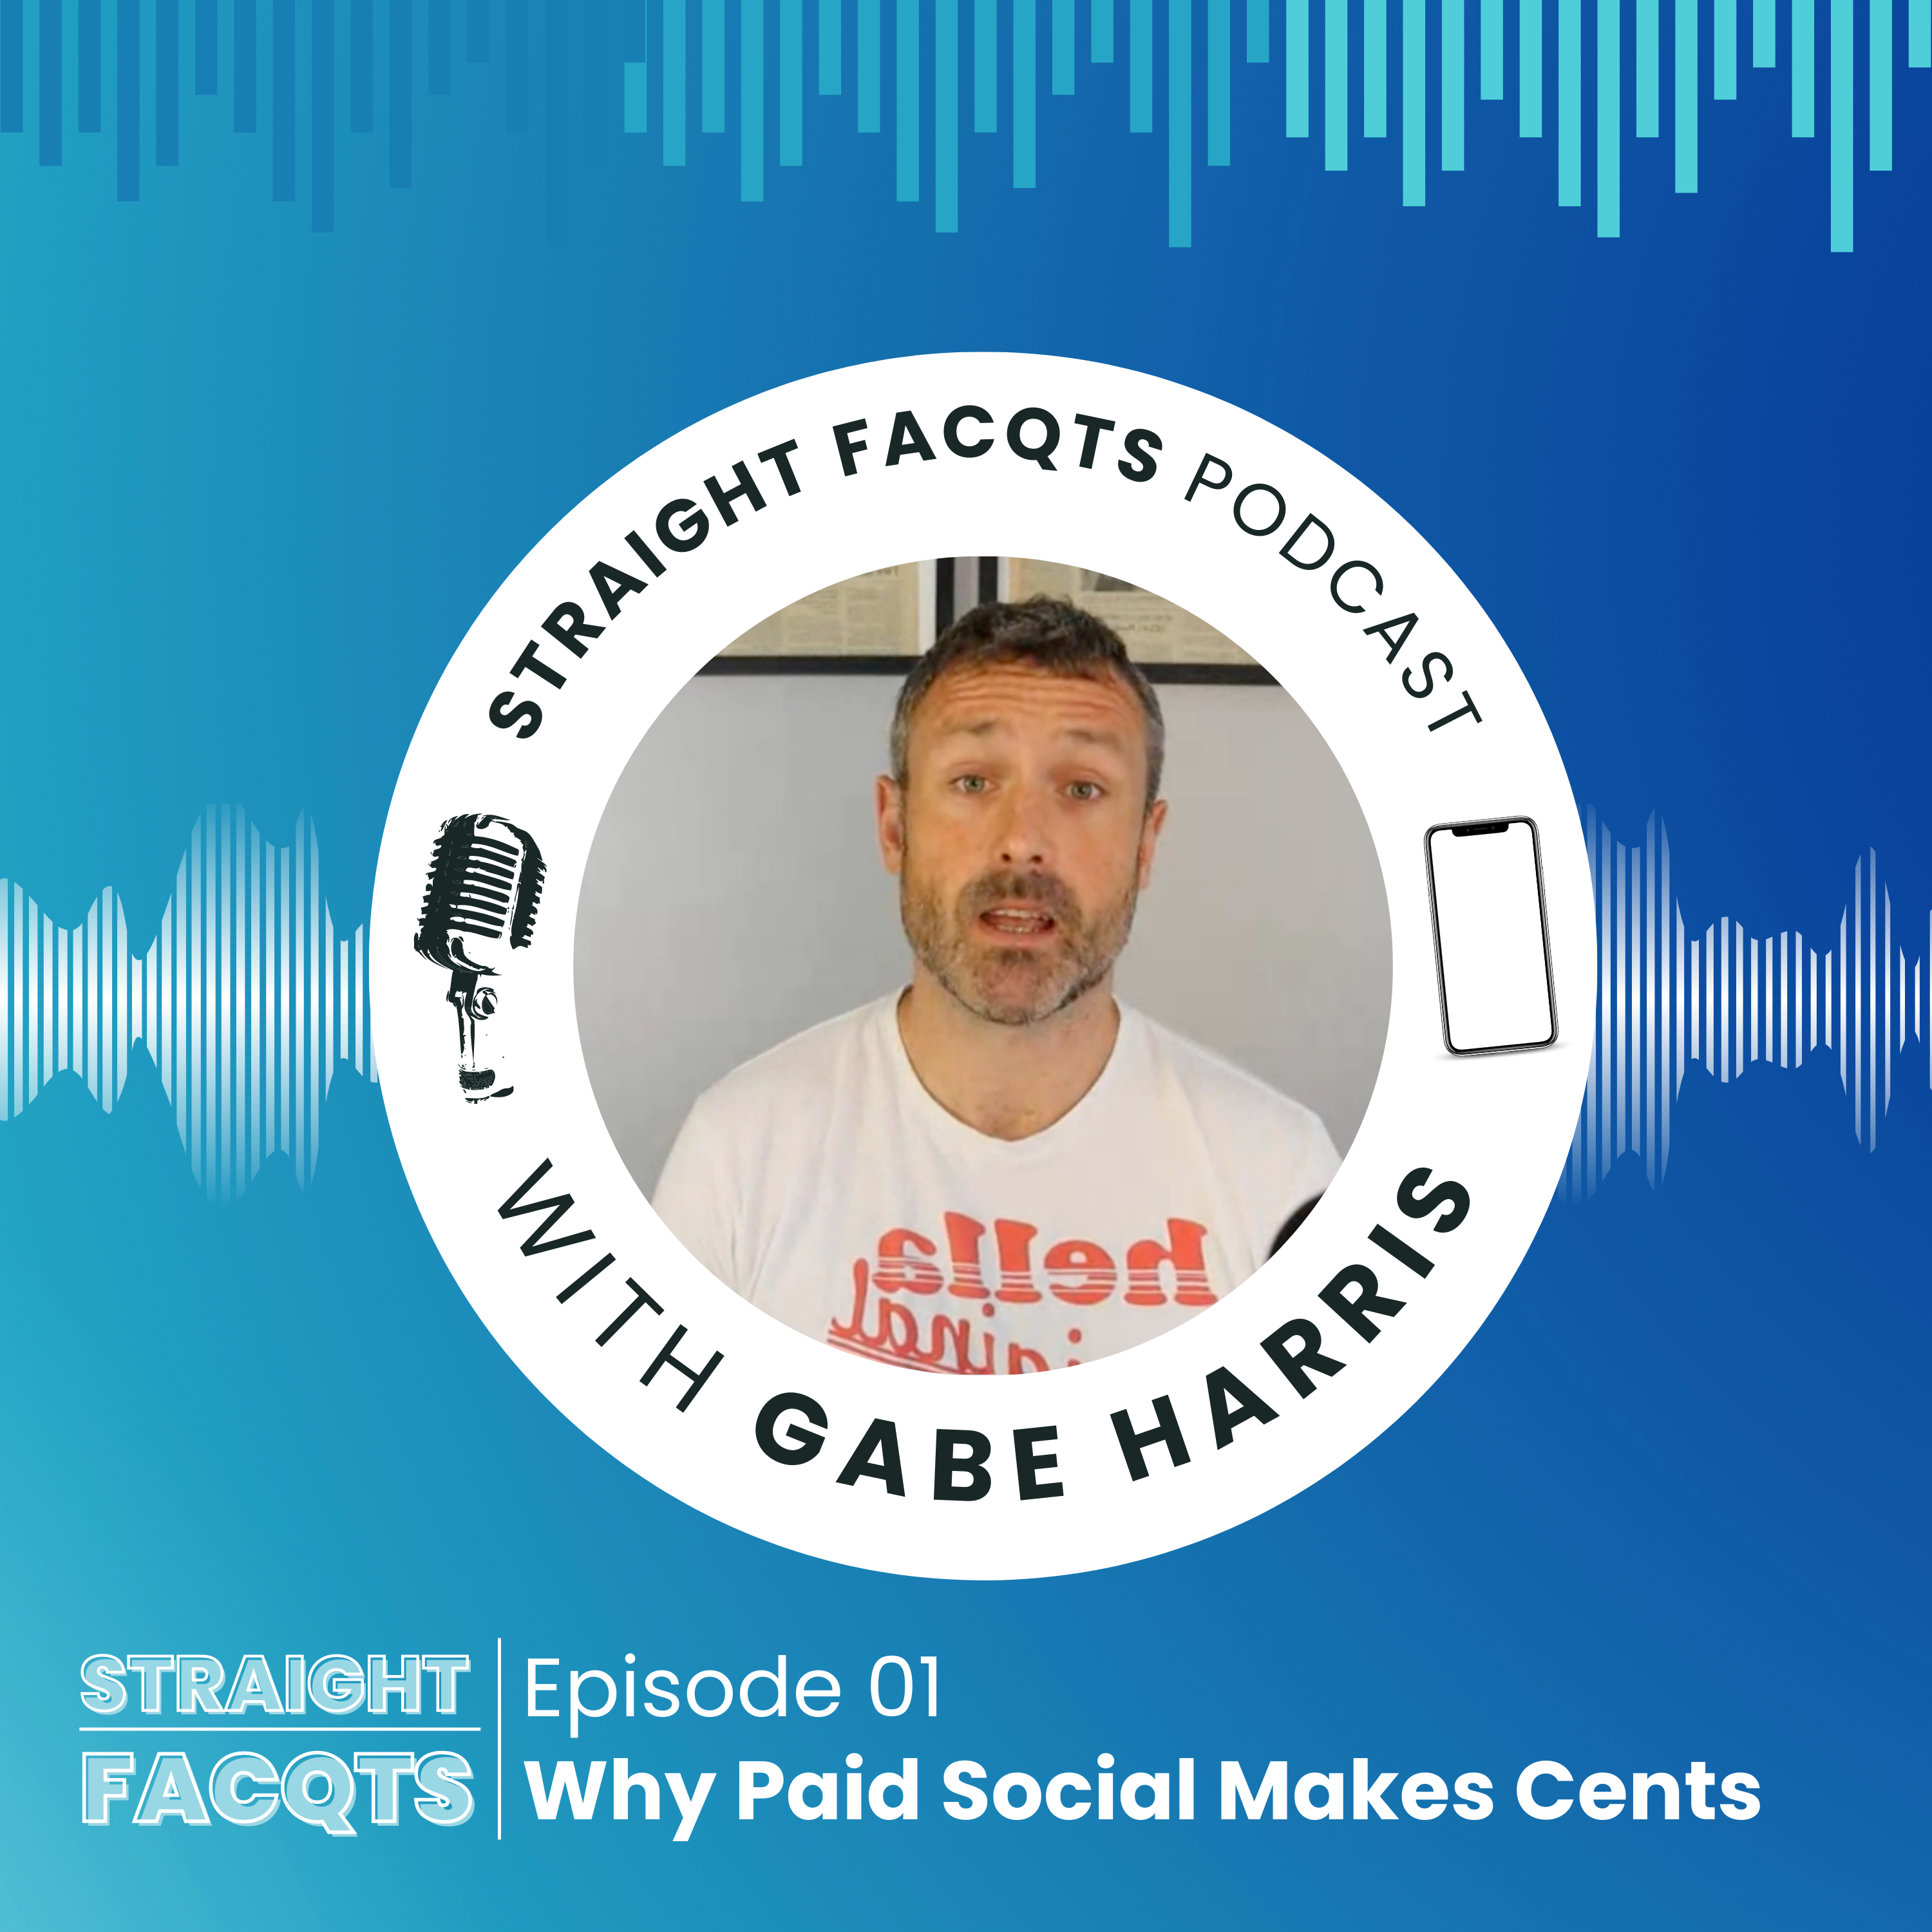 Why Paid Social Makes Cents | Straight Facqts Podcast Ep. 1